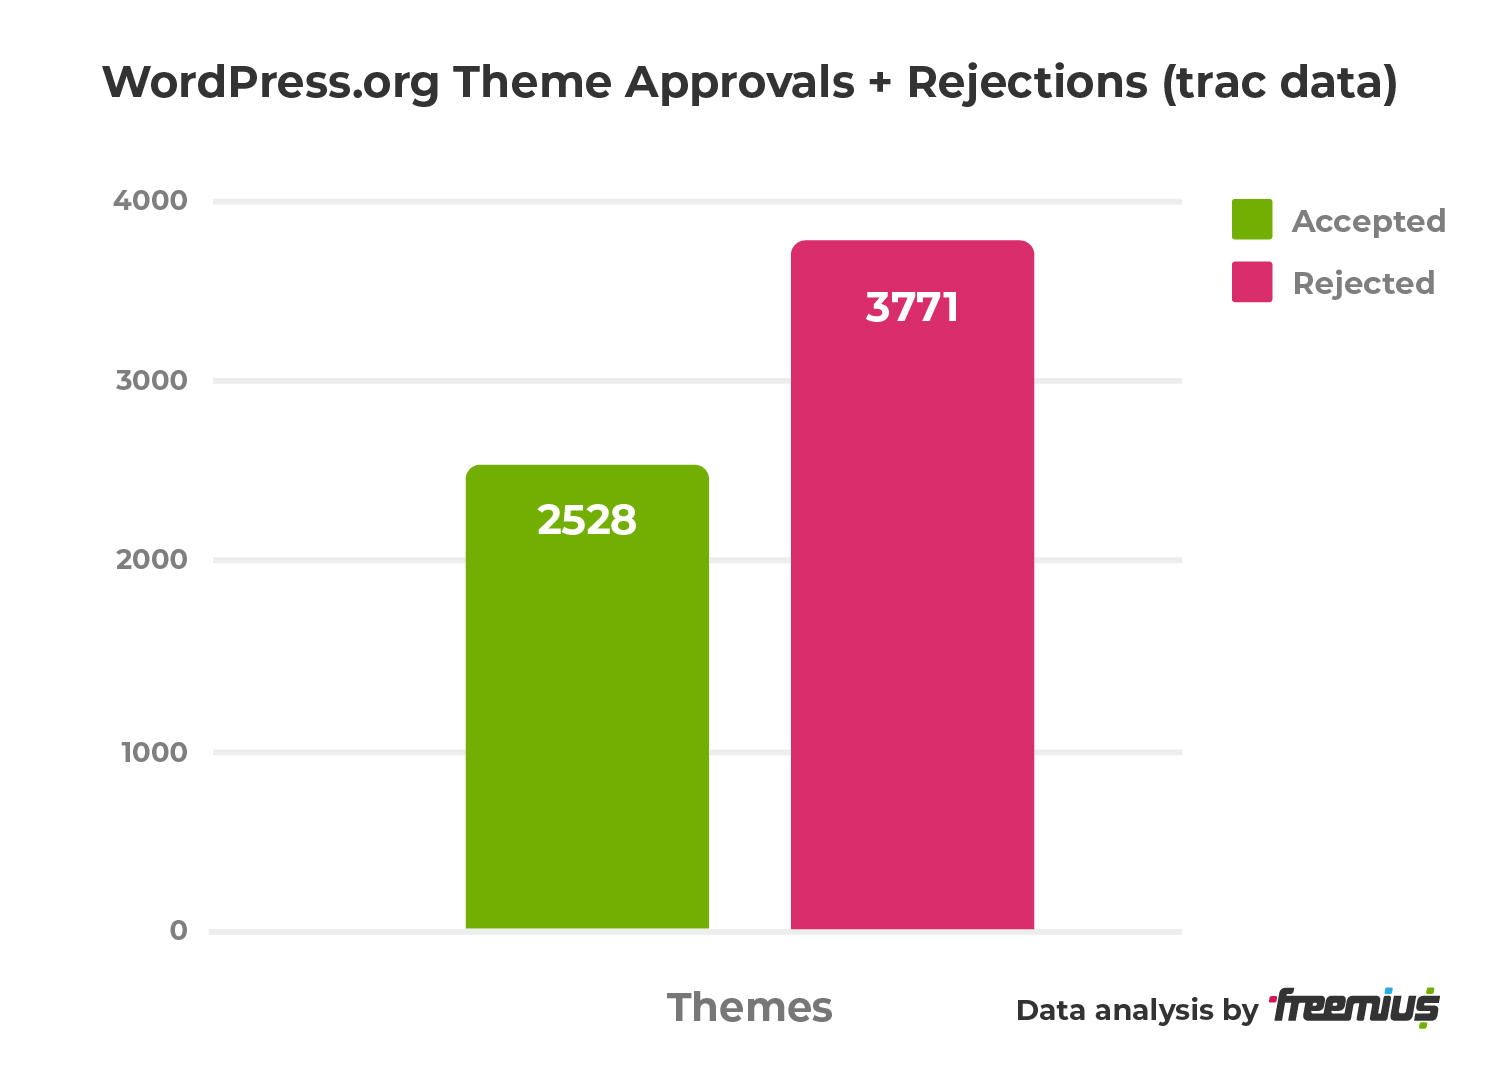 WordPress.org Theme Approvals and Rejections - trac data